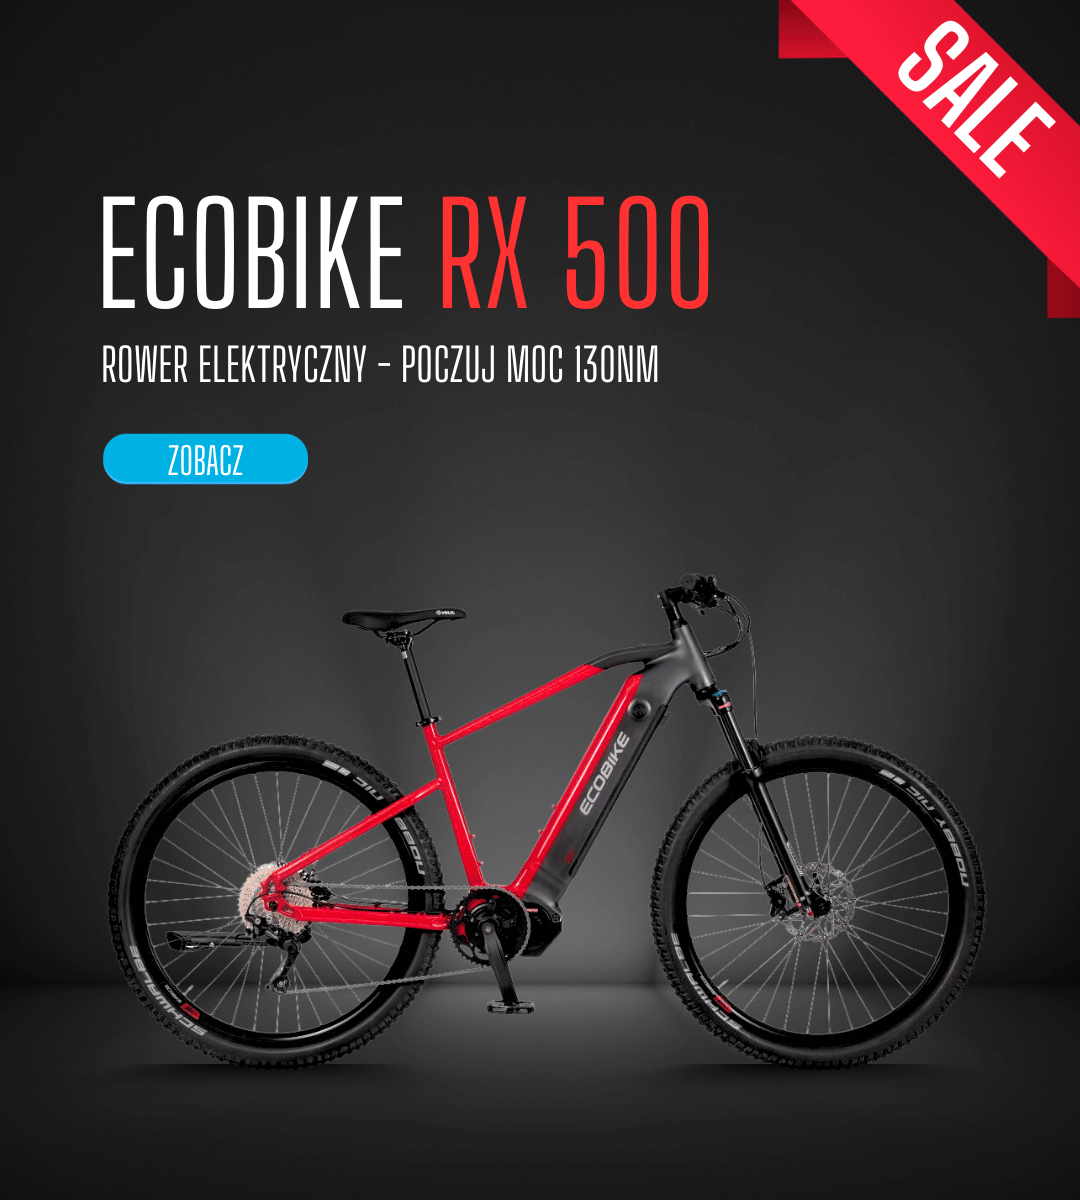 Ecobike rx 500 mobile